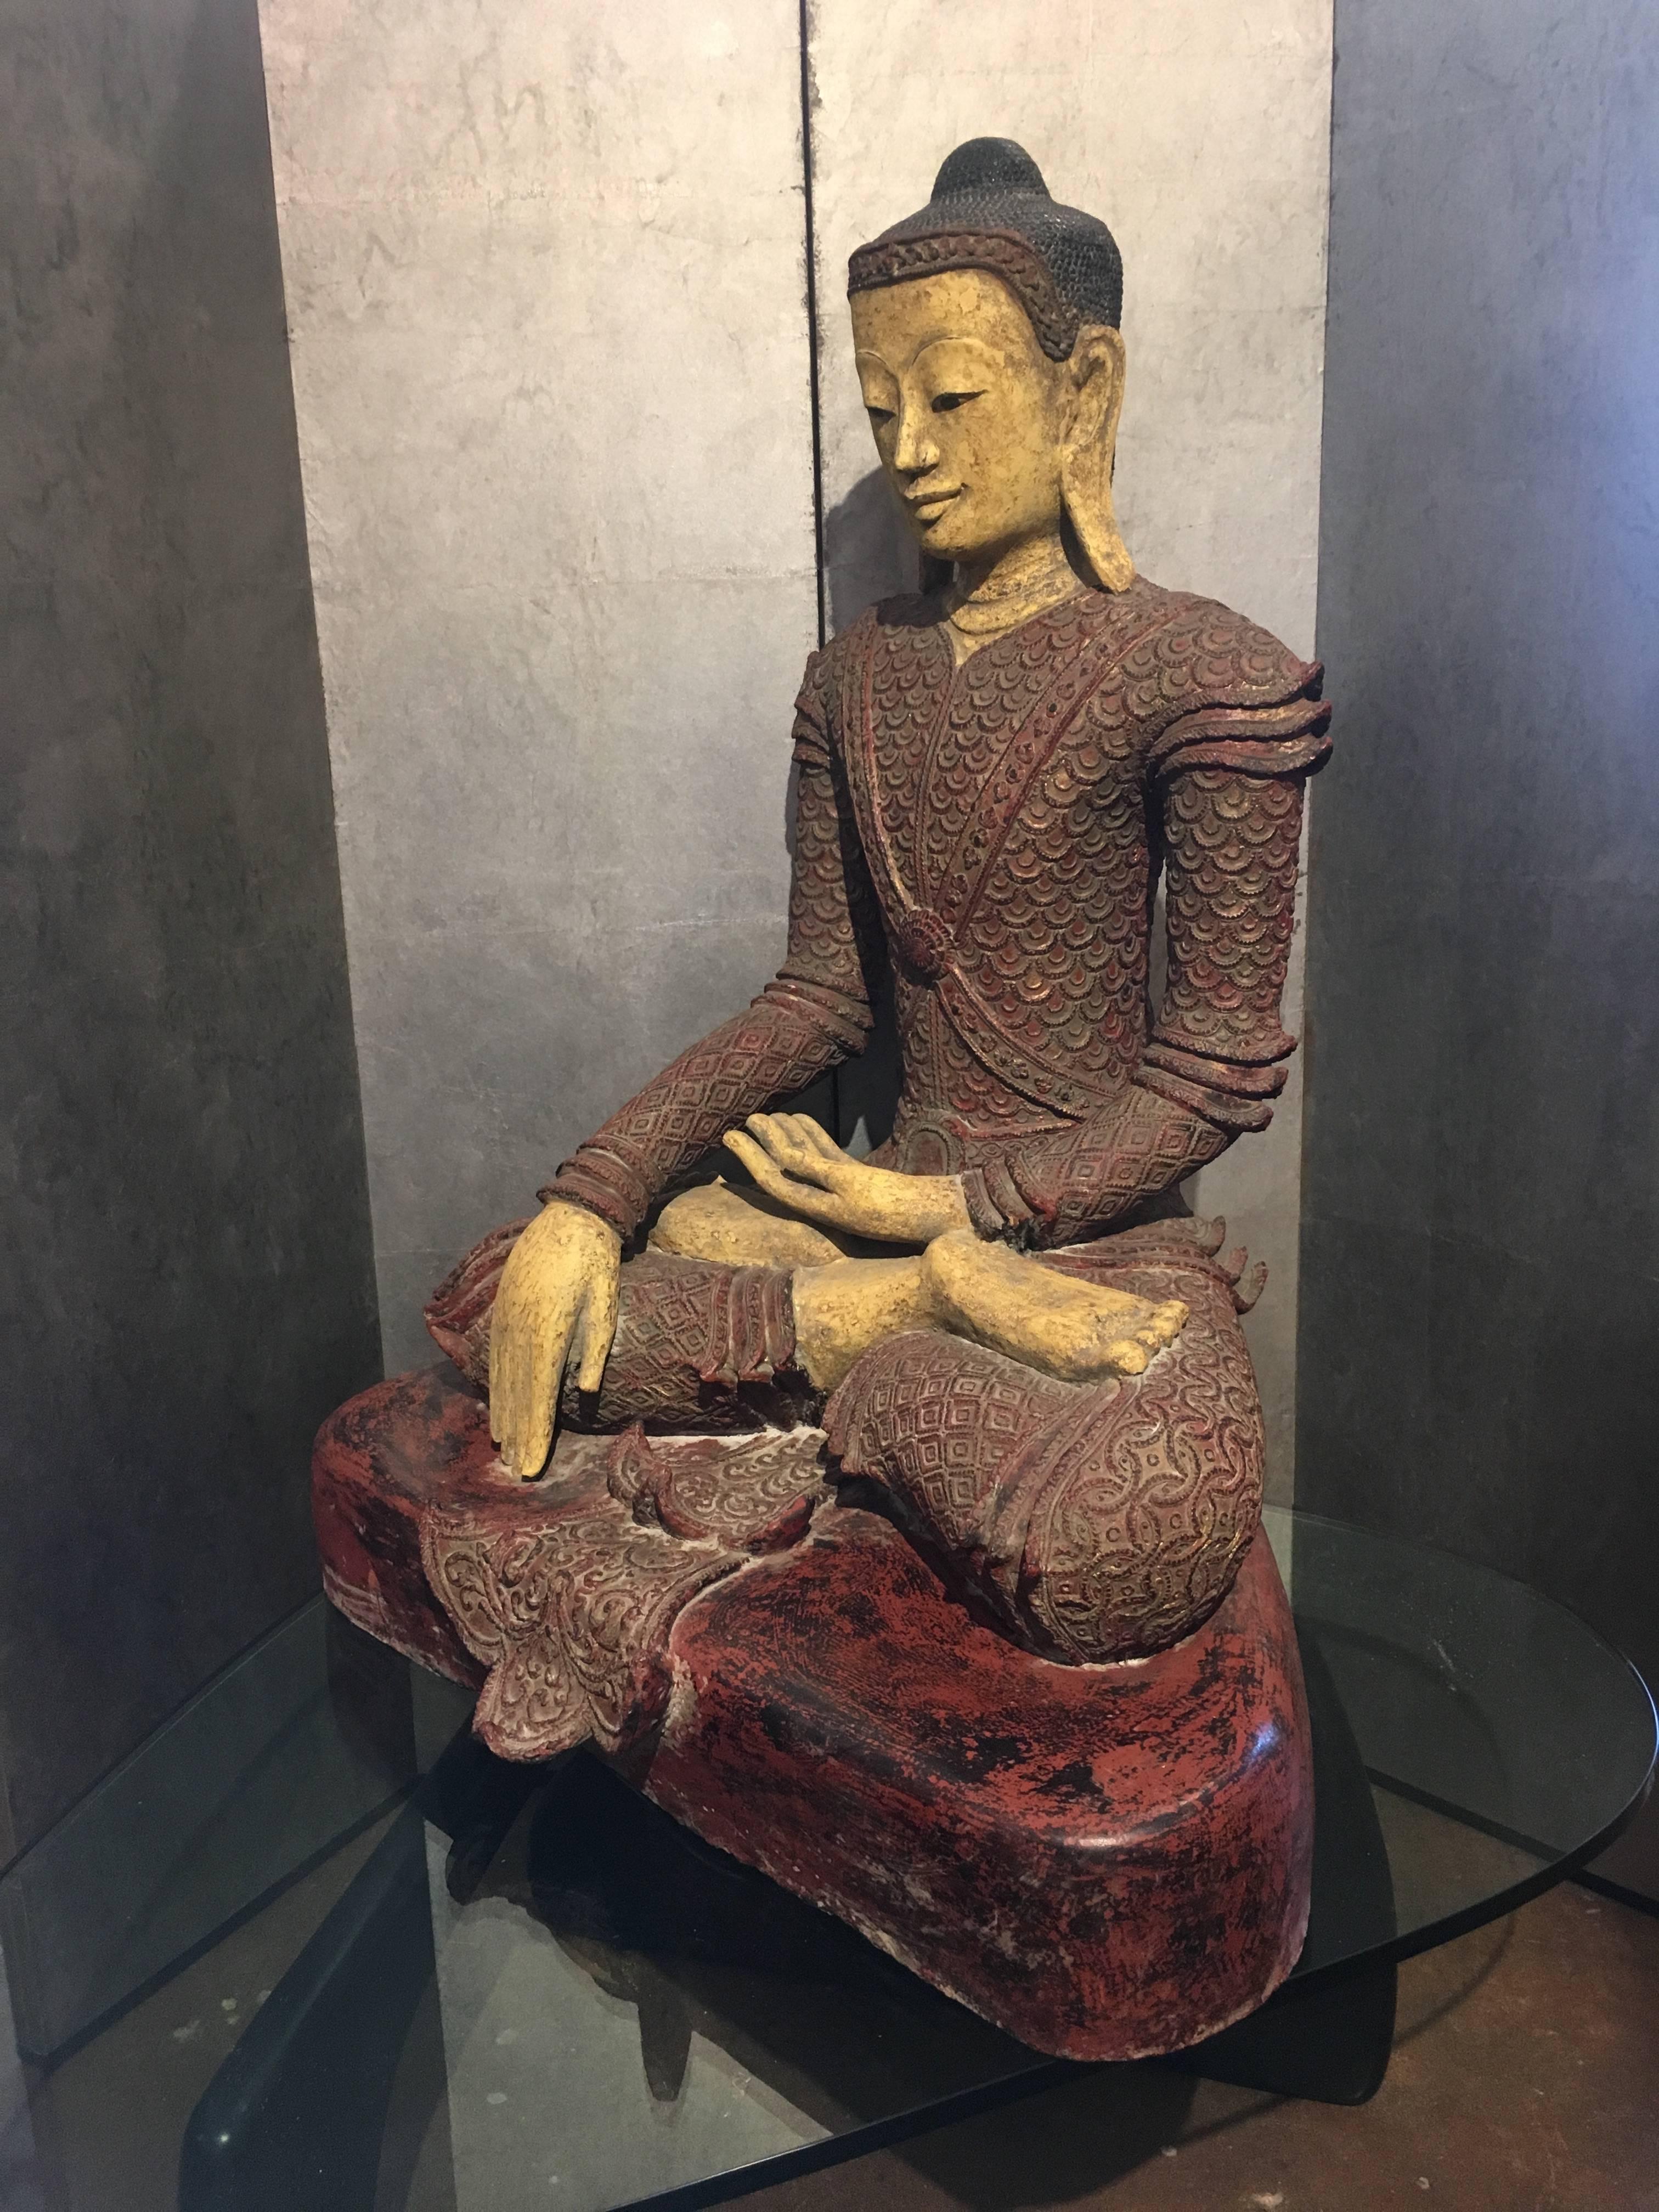 Gilt Life-Sized Burmese Dry Lacquer Buddha in Royal Attire, Early 20th Century